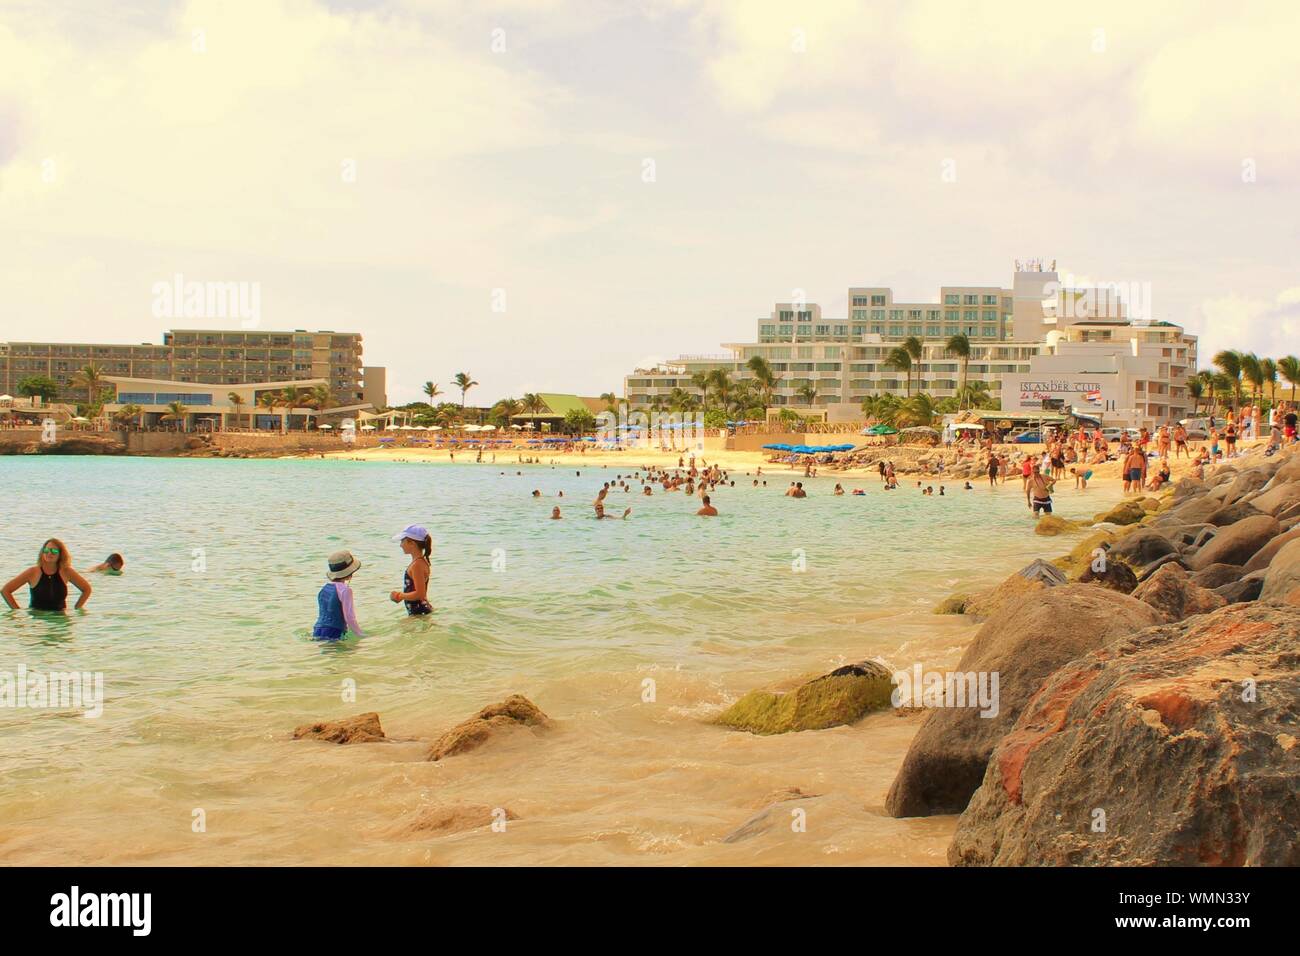 Maho Beach, Sint Maarten - August 19th 2019: Tourists and holidaymakers relax in the sea and on the sands, at Maho beach, St Maarten. Stock Photo